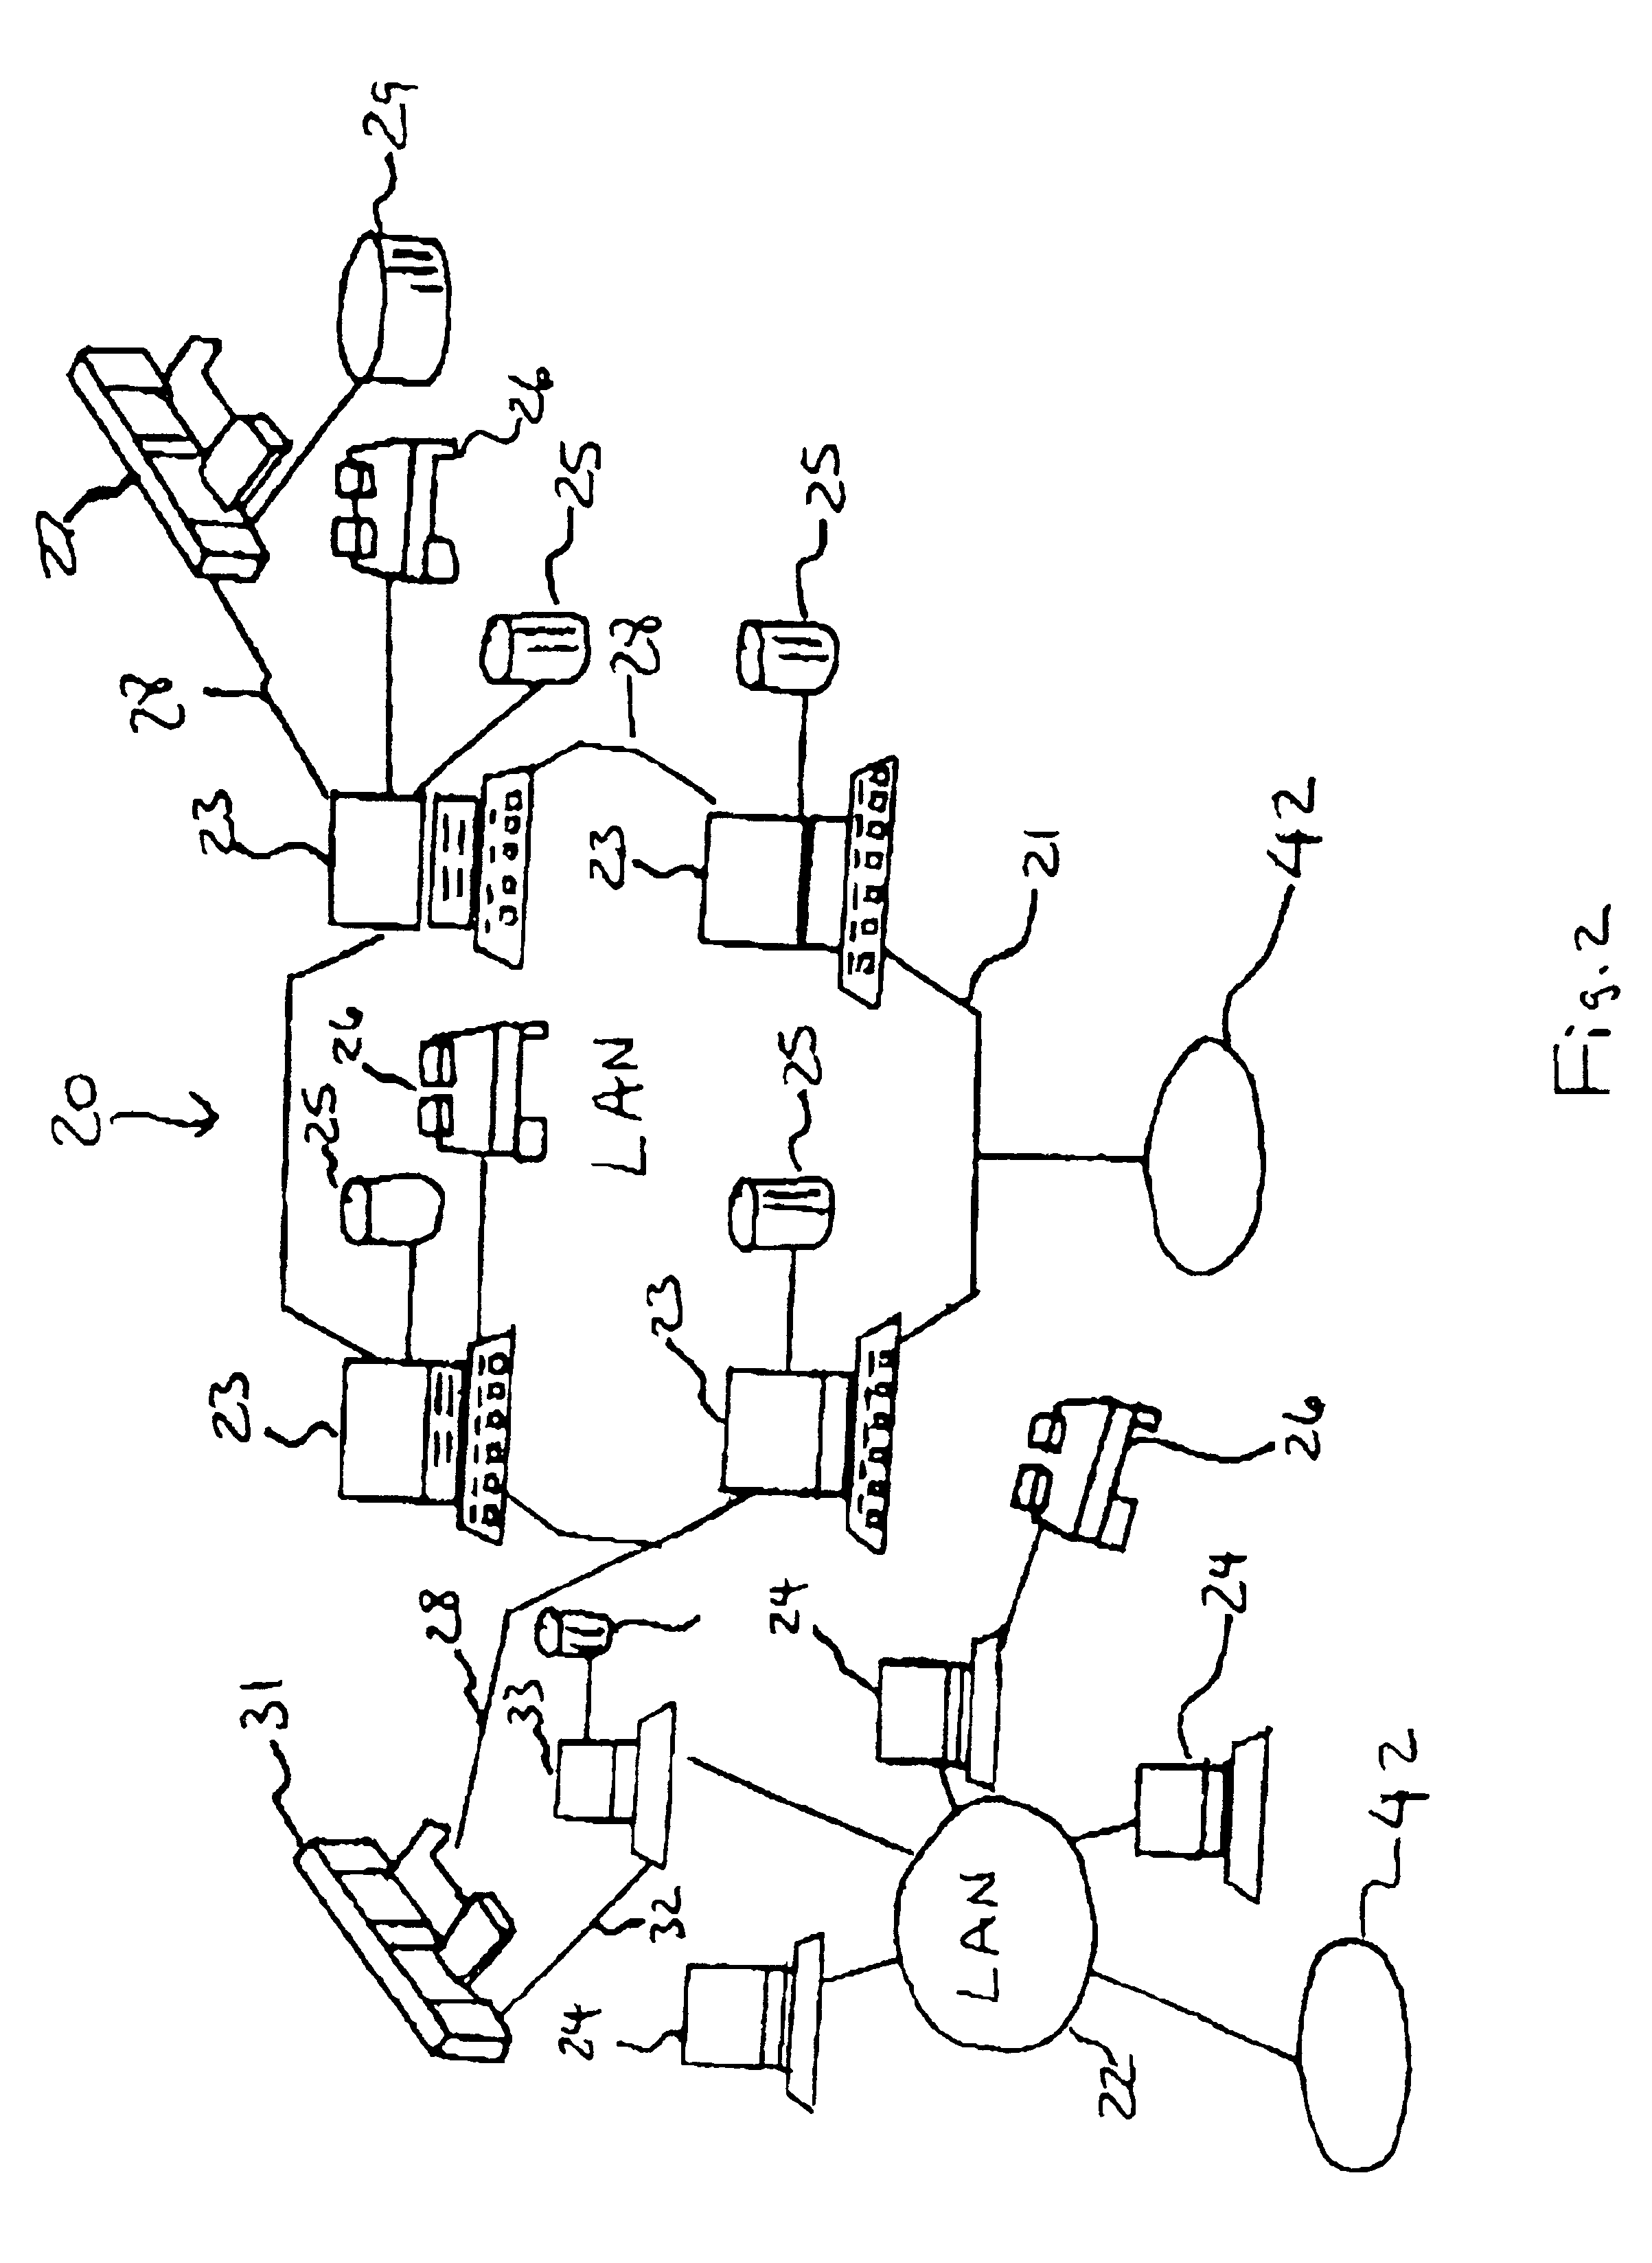 Method and system for evaluating applications on different user agents